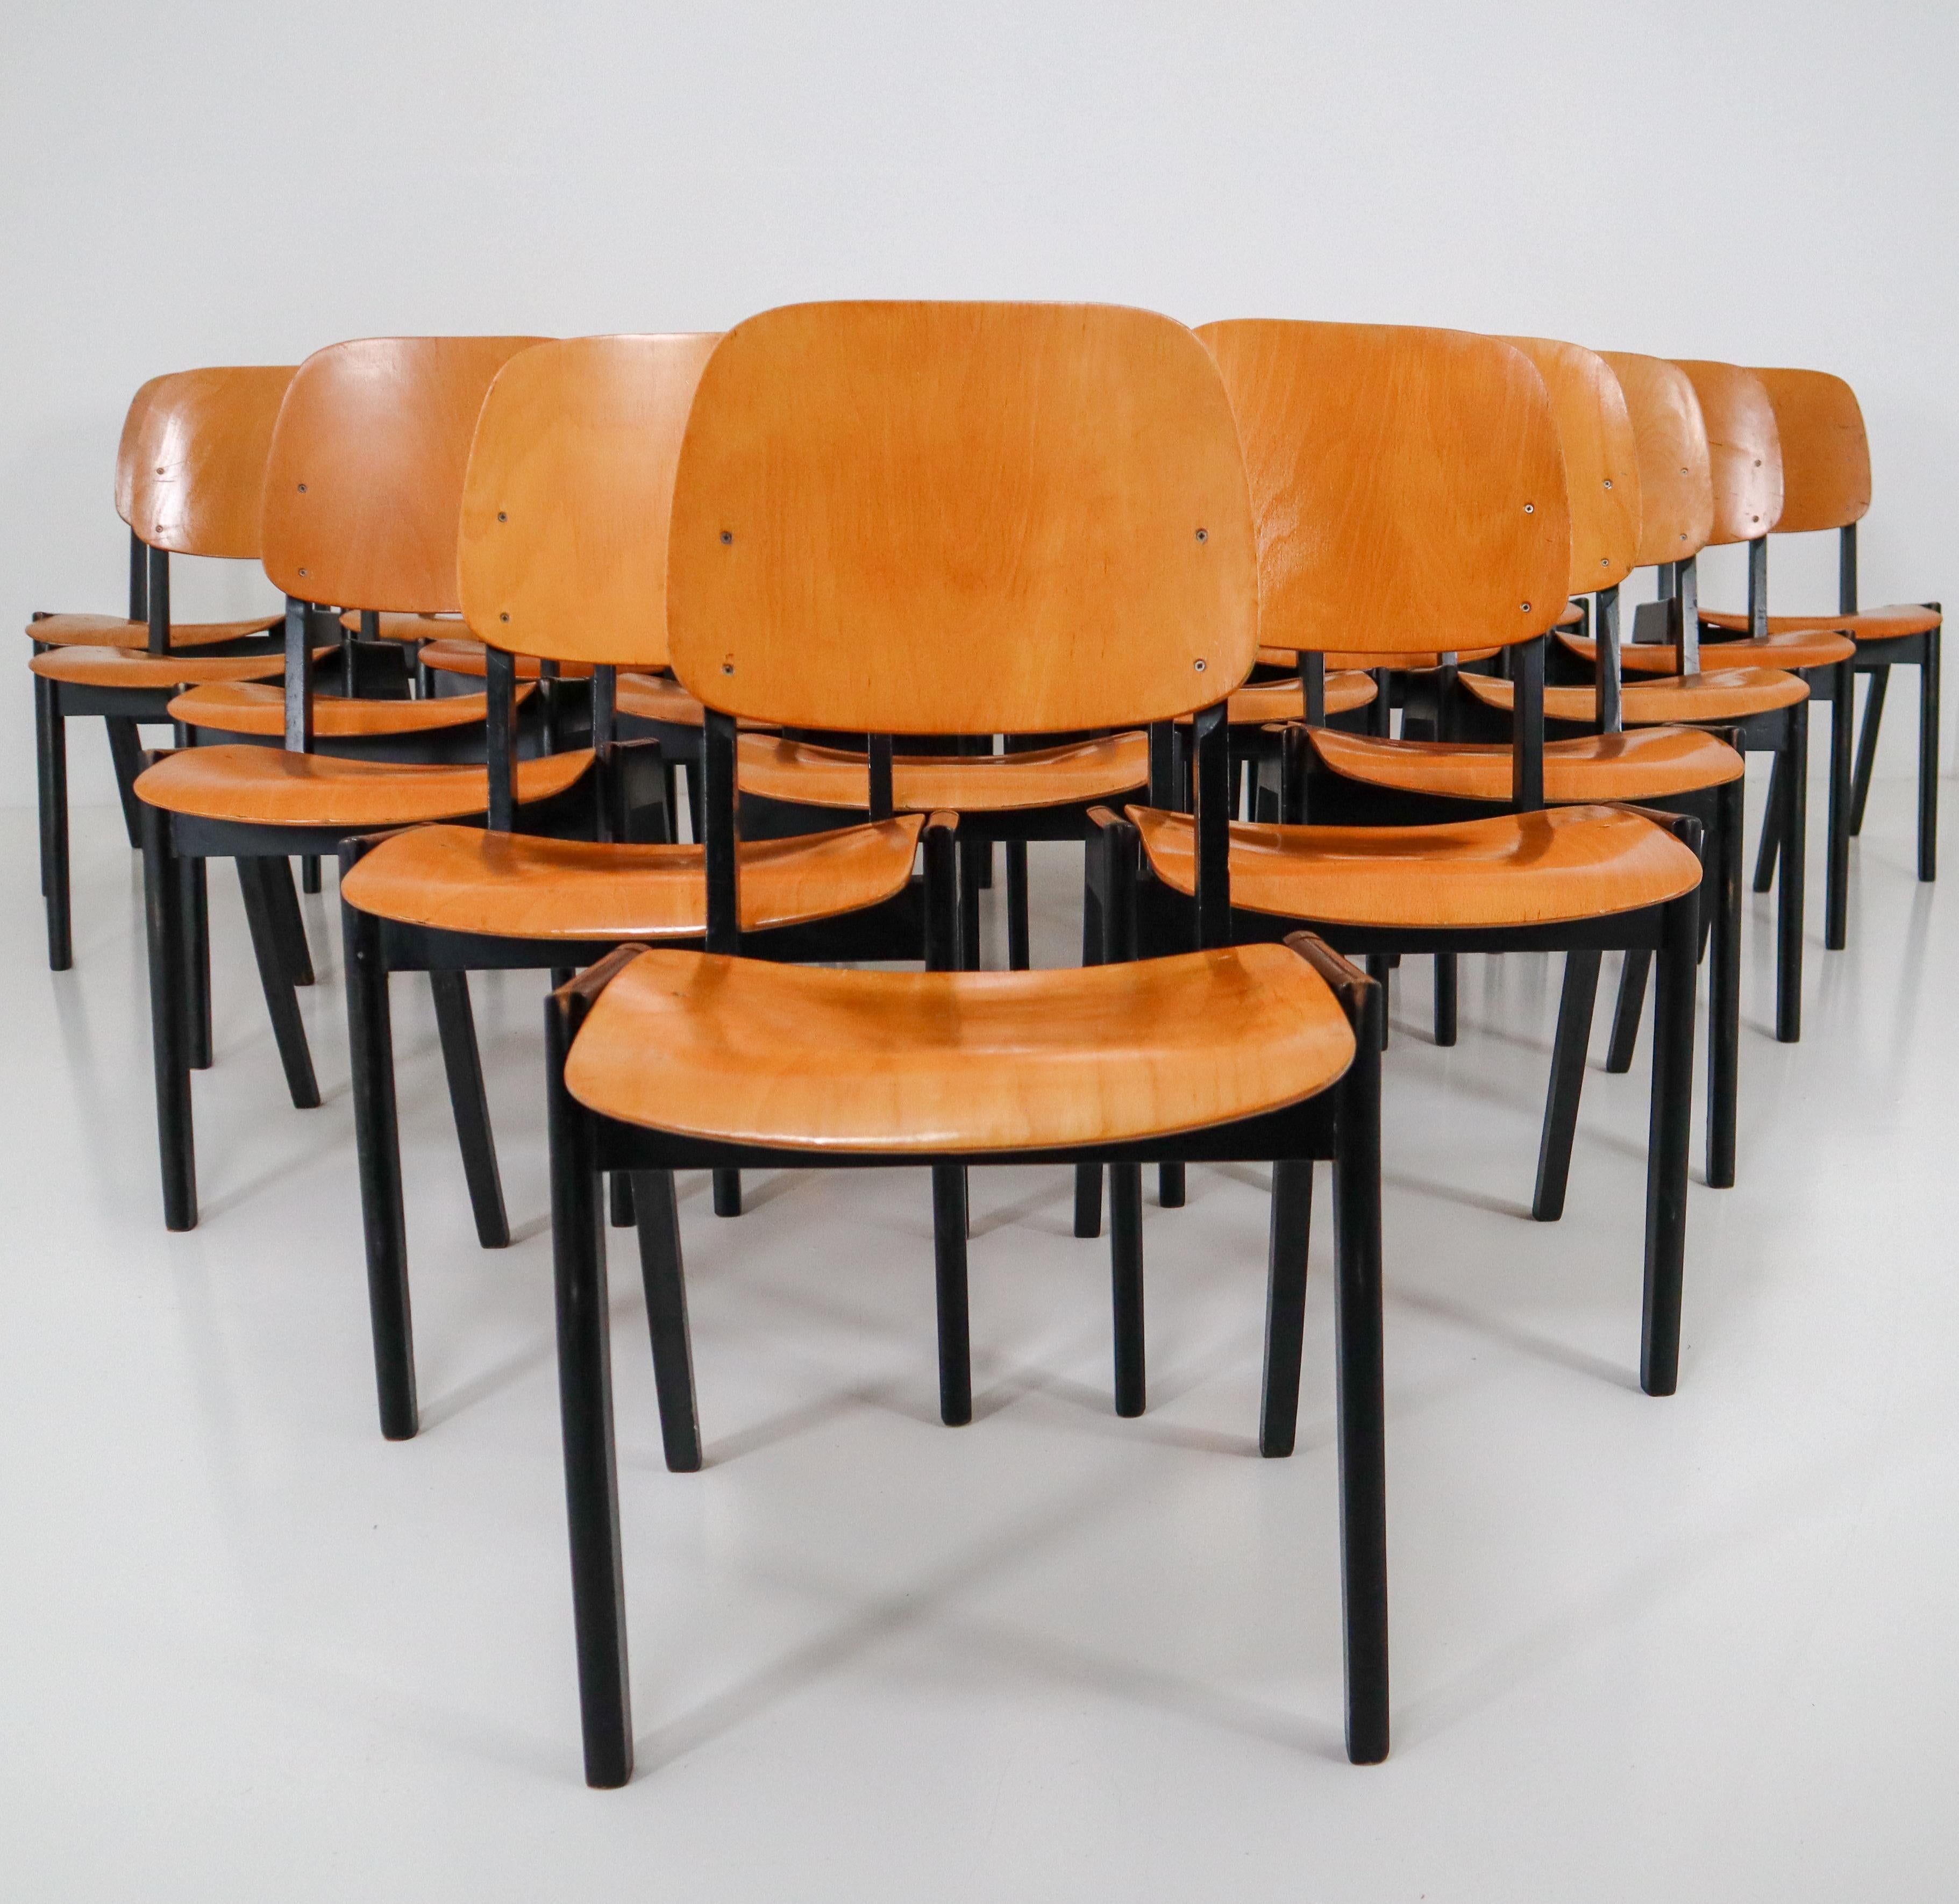 A set of 50 bicolored stacking chairs designed in the manner of Austrian architect Roland Rainer manufactured in Austria, circa 1960 (late 1950s or early 1960s). They are made of beechwood with partly blond-brown painted seats and backs. The tone of